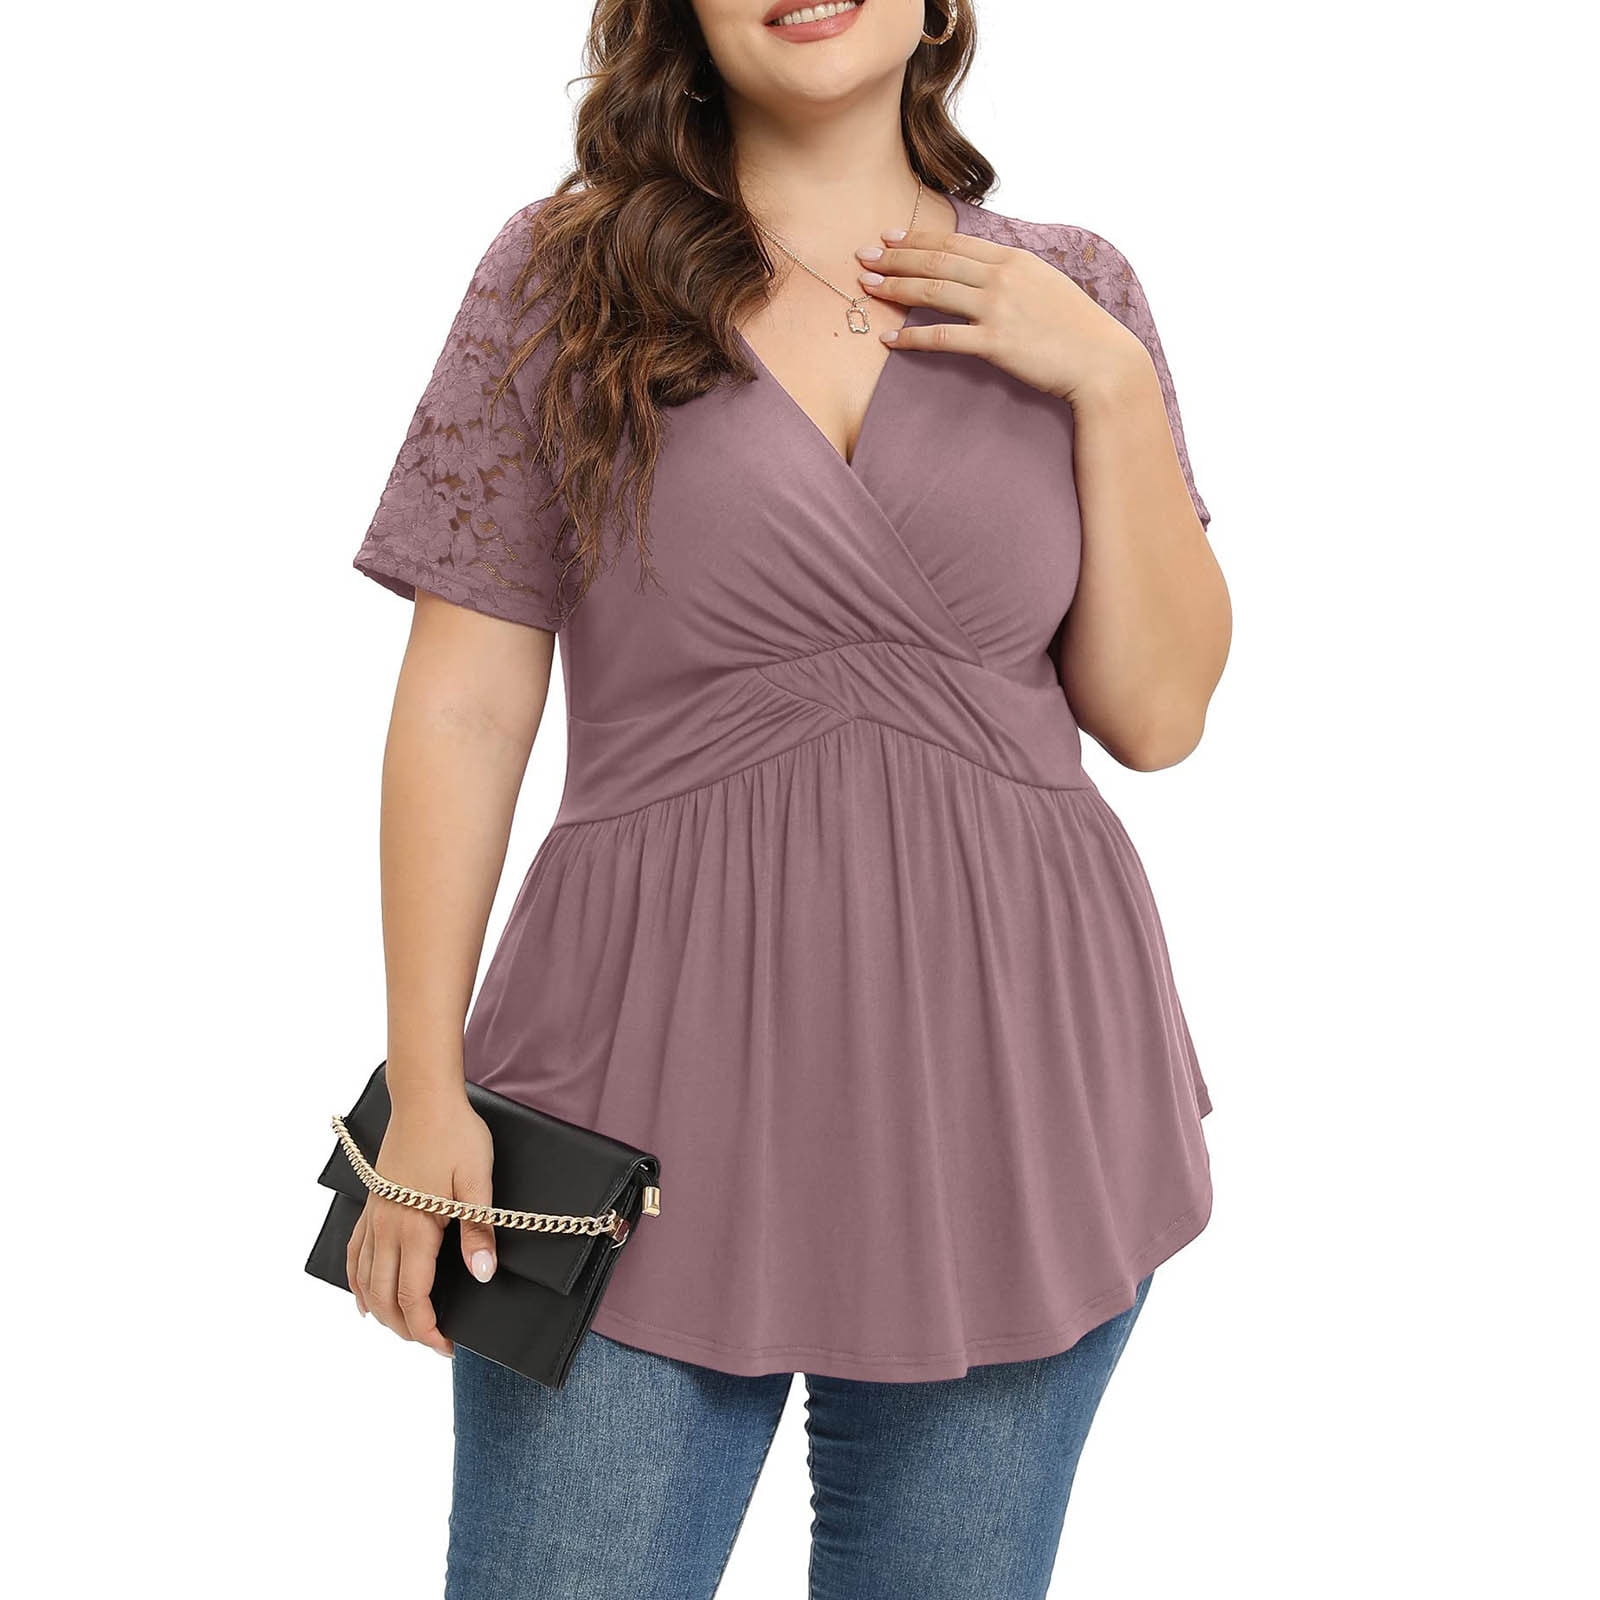 SELONE Plus Size Tops for Women Short Sleeve Tops Blouses Regular Fit T  Shirts Pullover Tops Tees Tops Solid T-Shirts V Neck Tops Blouses T Shirts